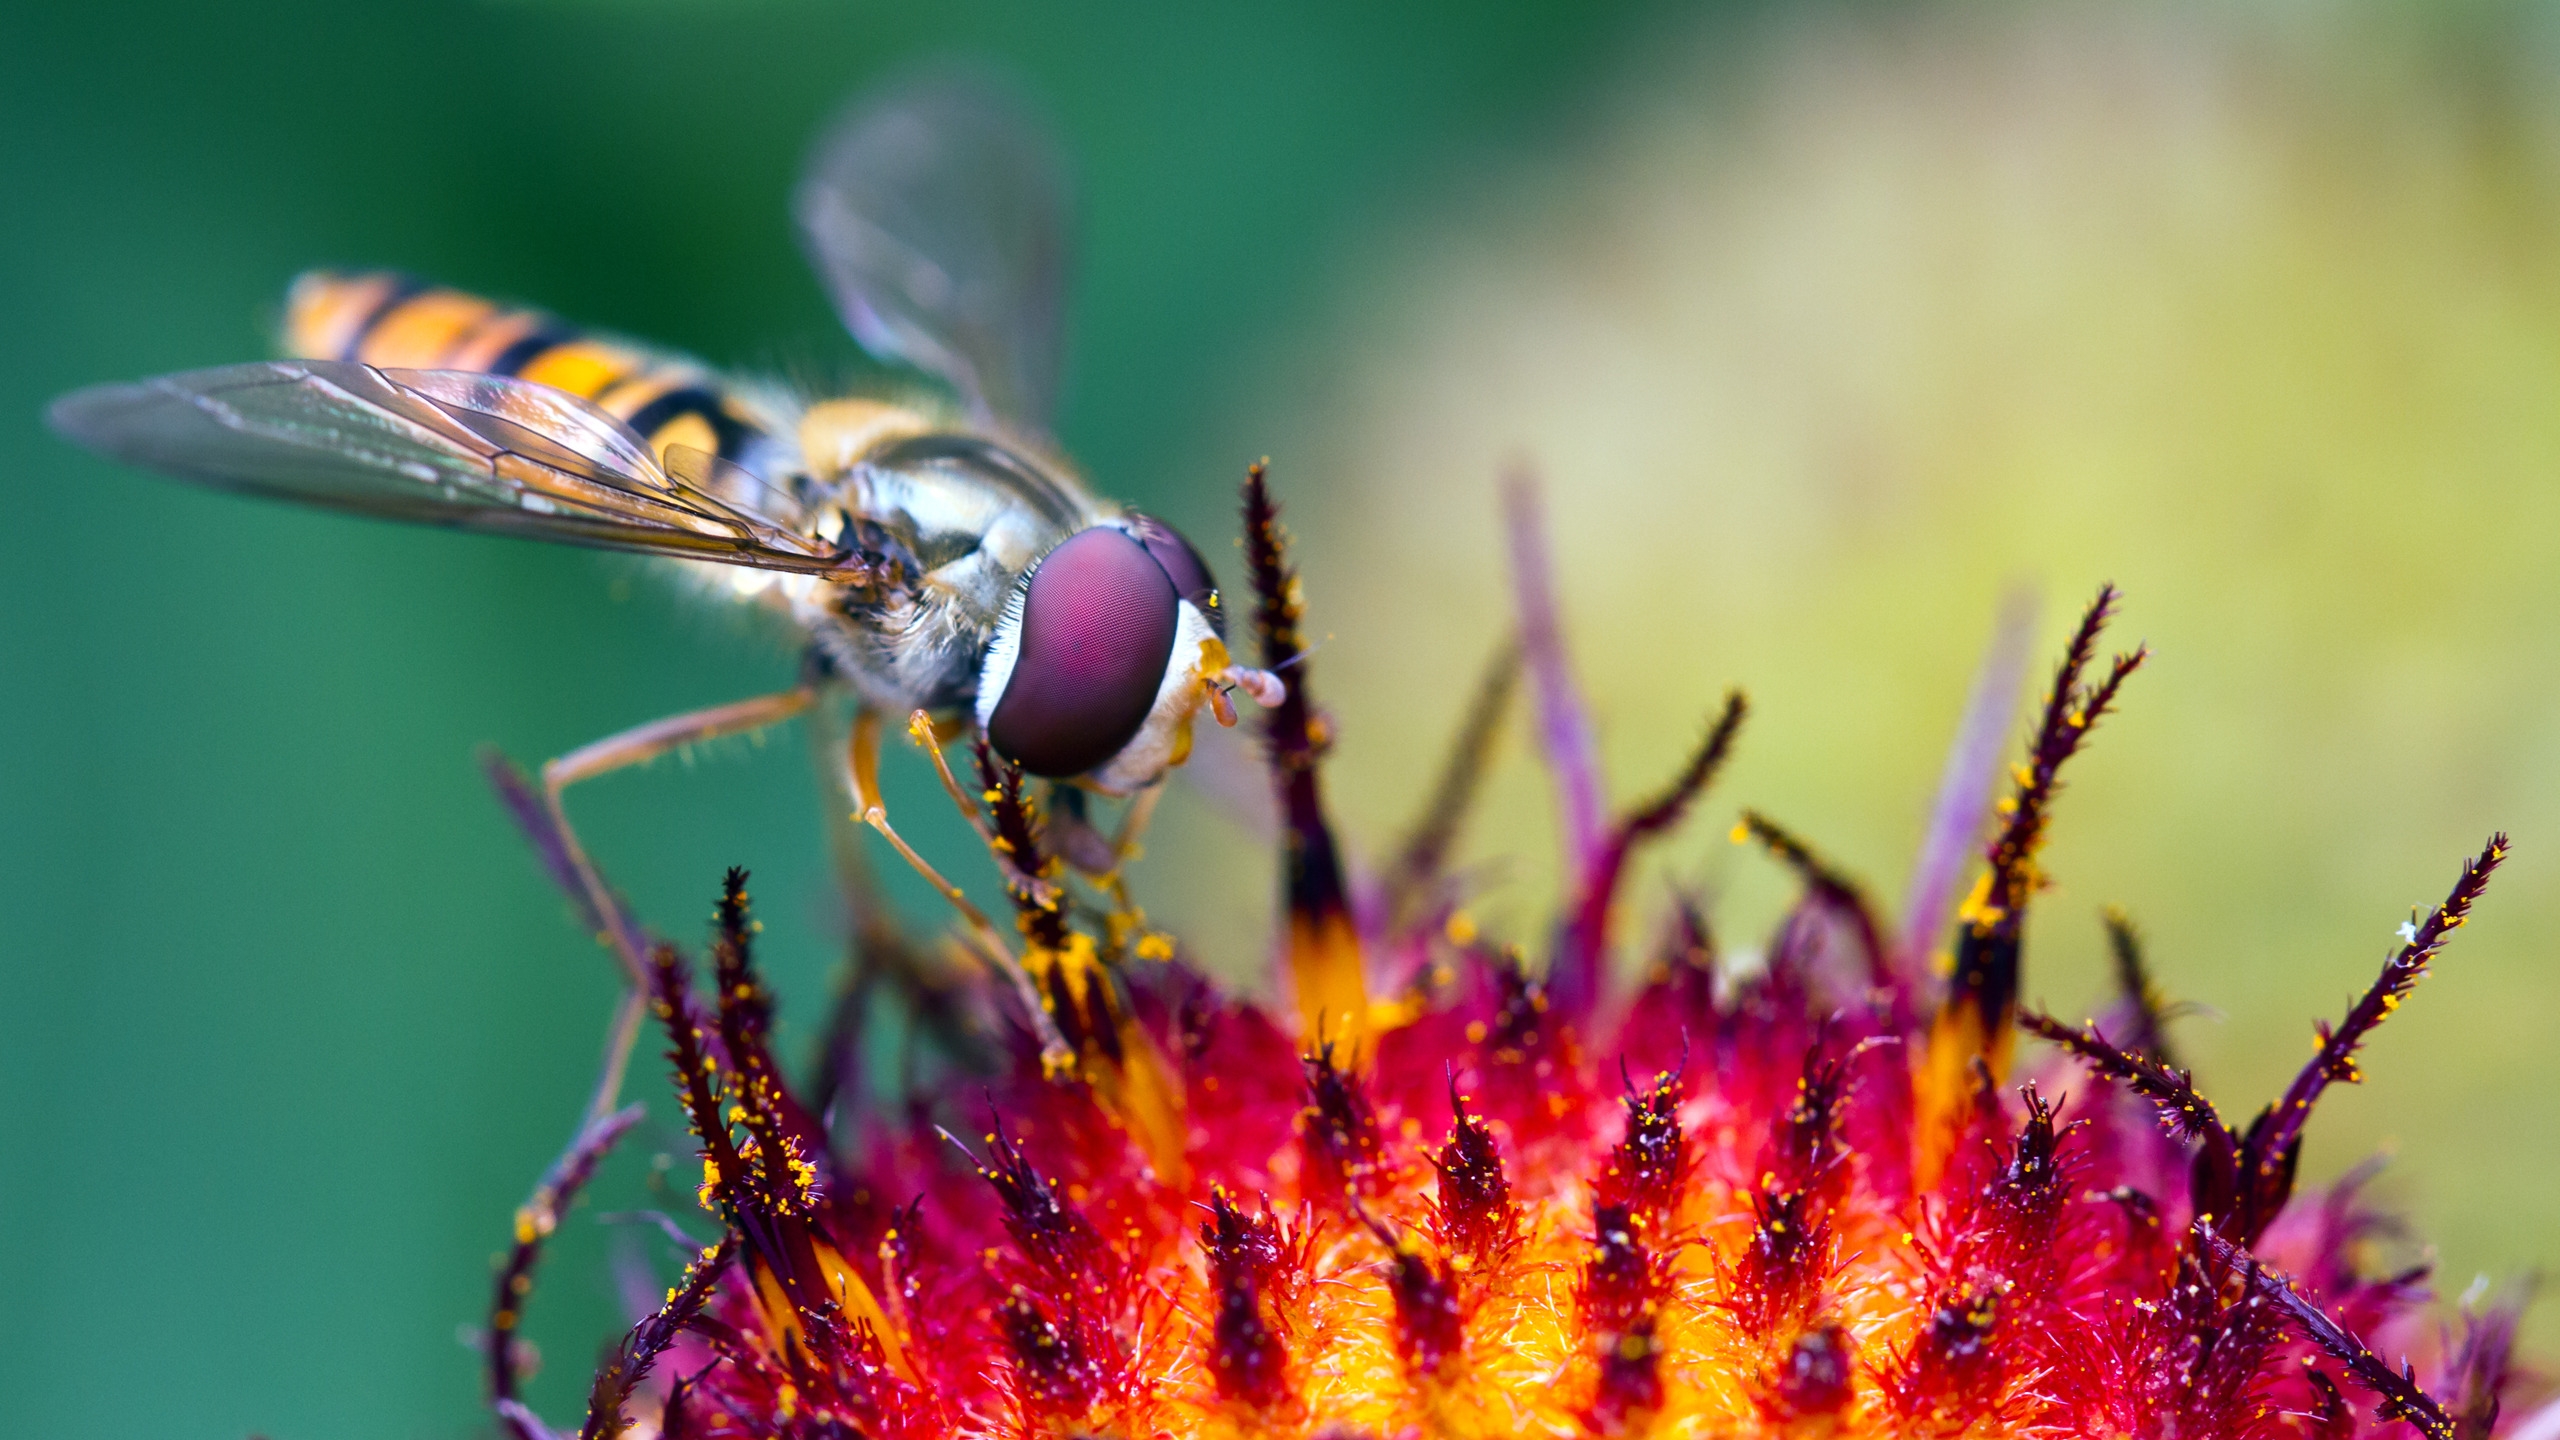 Hover Fly at Work for 2560x1440 HDTV resolution